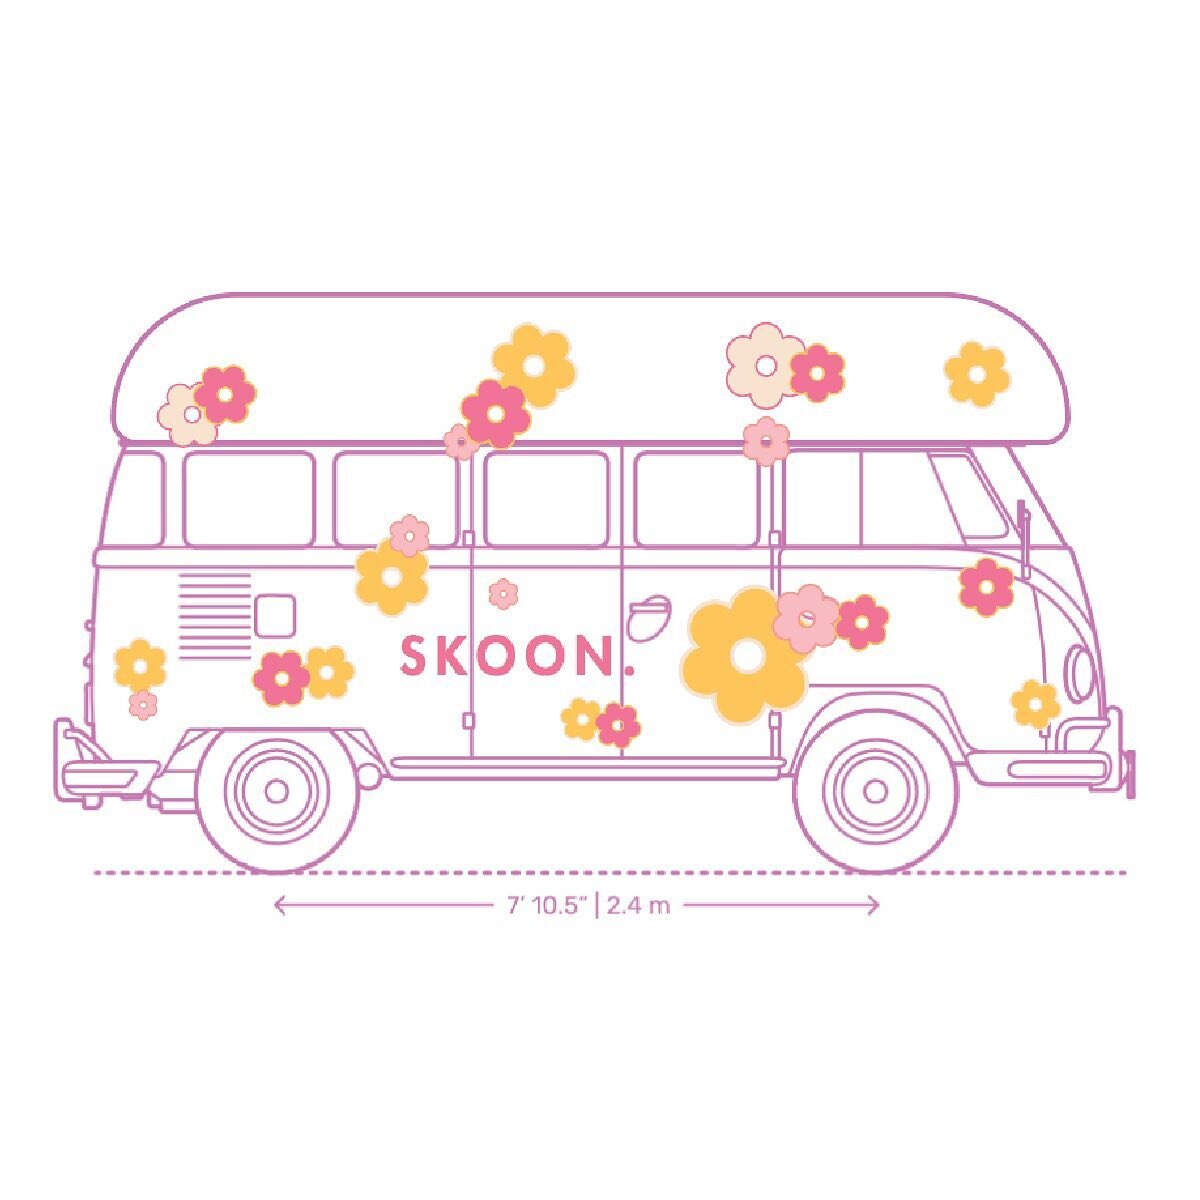 SKOON. Happy Flora ROAD TRIP!⁠
⁠
Involved 6 stops in busy spots like Kloof Street, Kalk Bay, Muizenberg, Camps Bay, Hout Bay, Sea Point promenade and Blouberg beachfront.